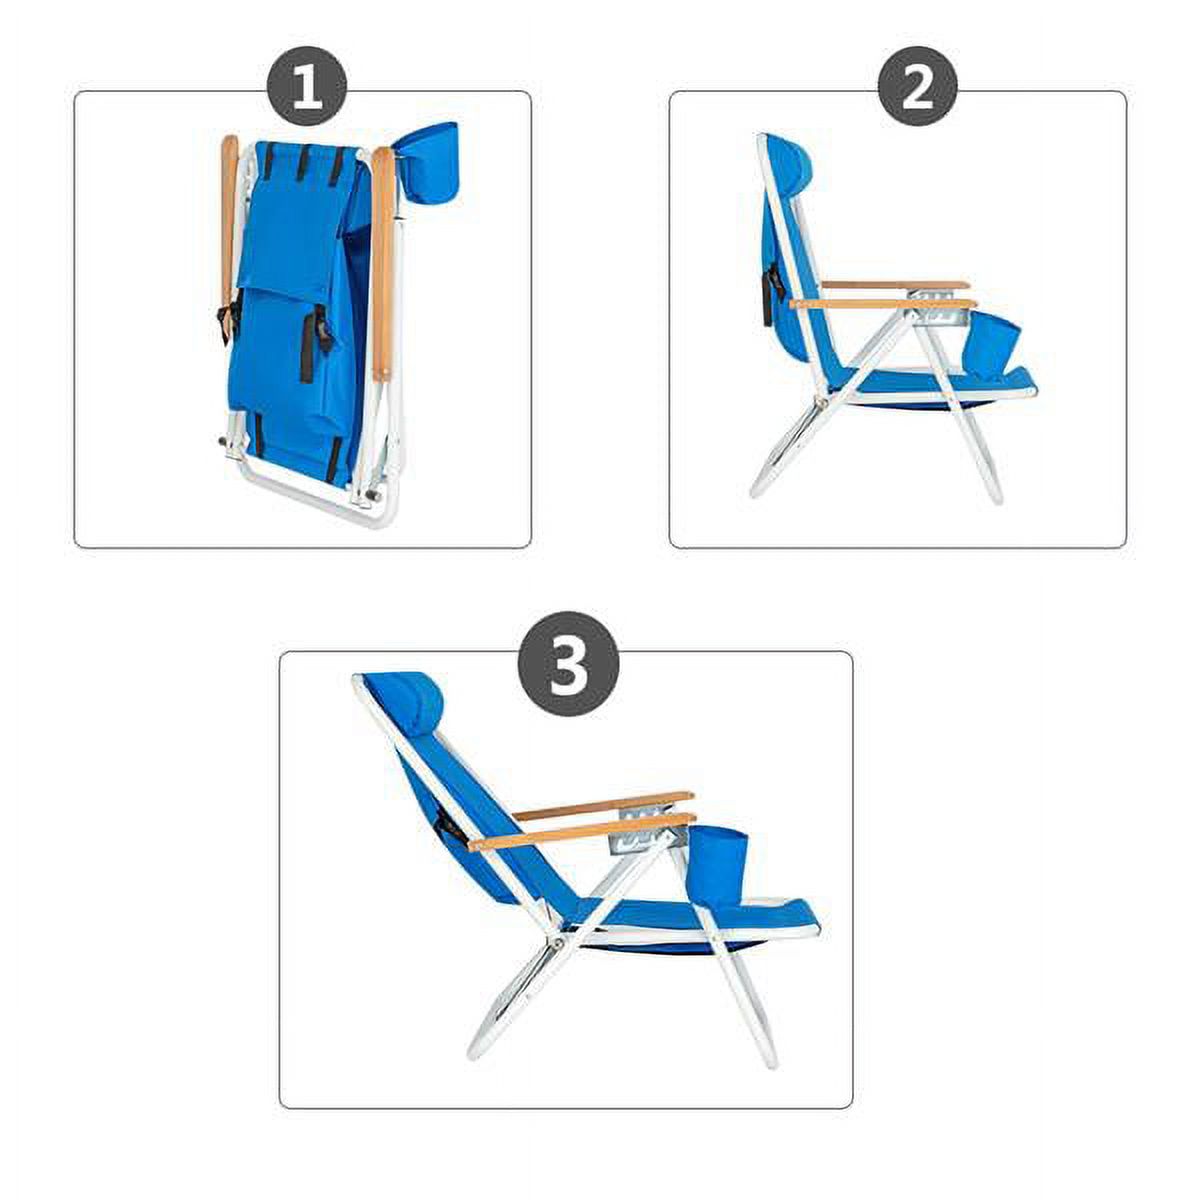 Clearance!  5 PCAKS Folding Lounge Chair,Portable High Beach Chair,Patio Folding Lightweight Camping Chair, Outdoor Garden Park Pool Side Lounge Chair, with Cup Holder, Adjustable Headrest, Blue - image 5 of 7